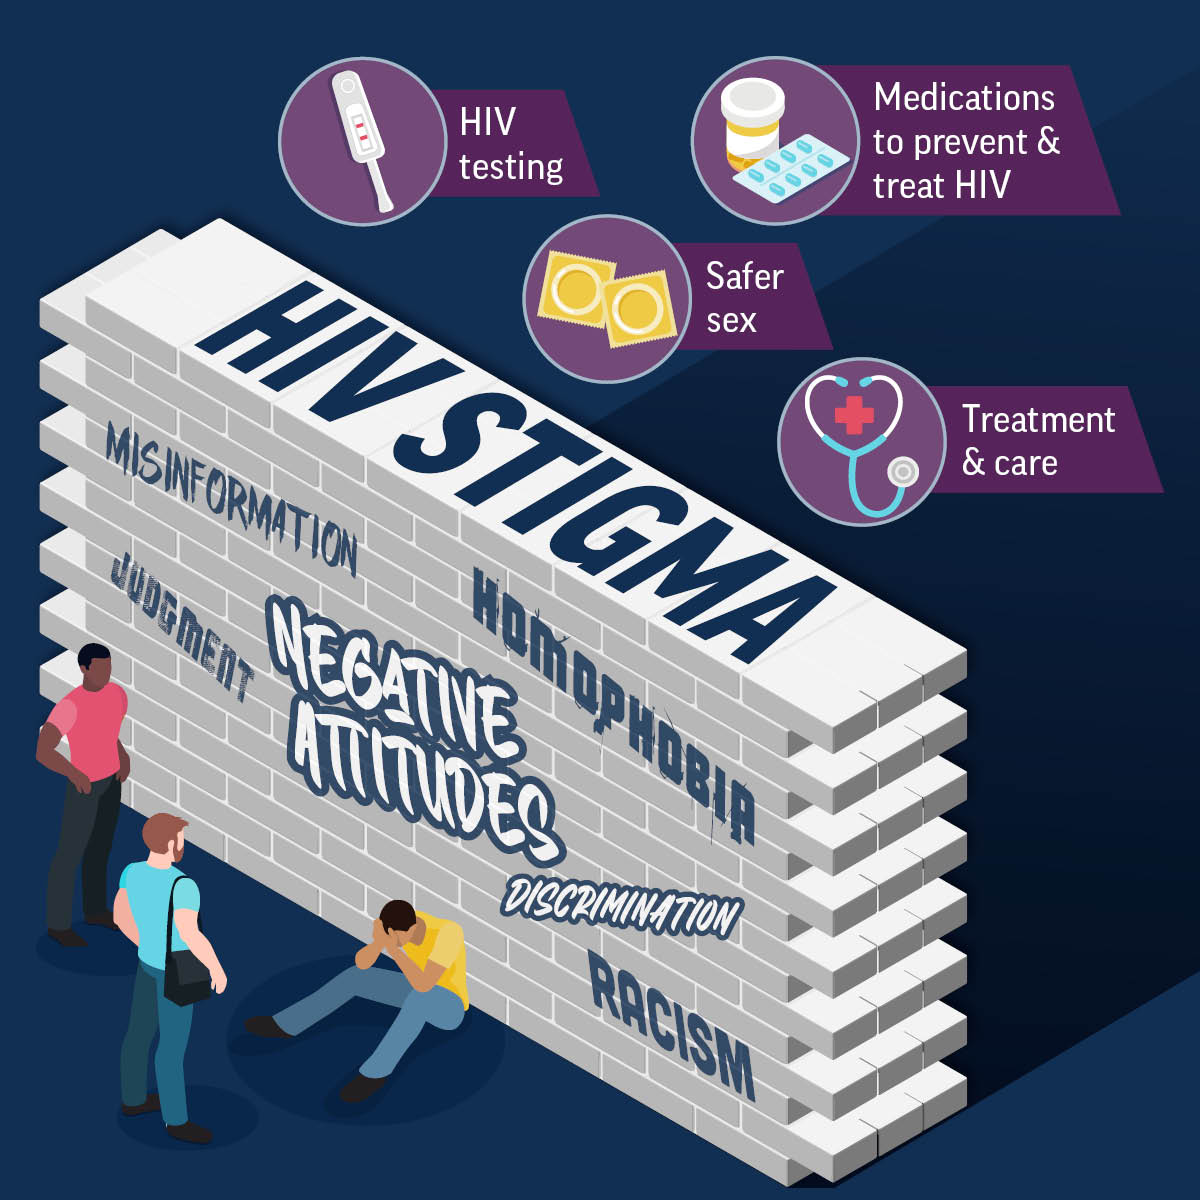 Graphic showing a wall labeled HIV stigma as a barrier to HIV testing, medications, safer sex, and treatment and care.